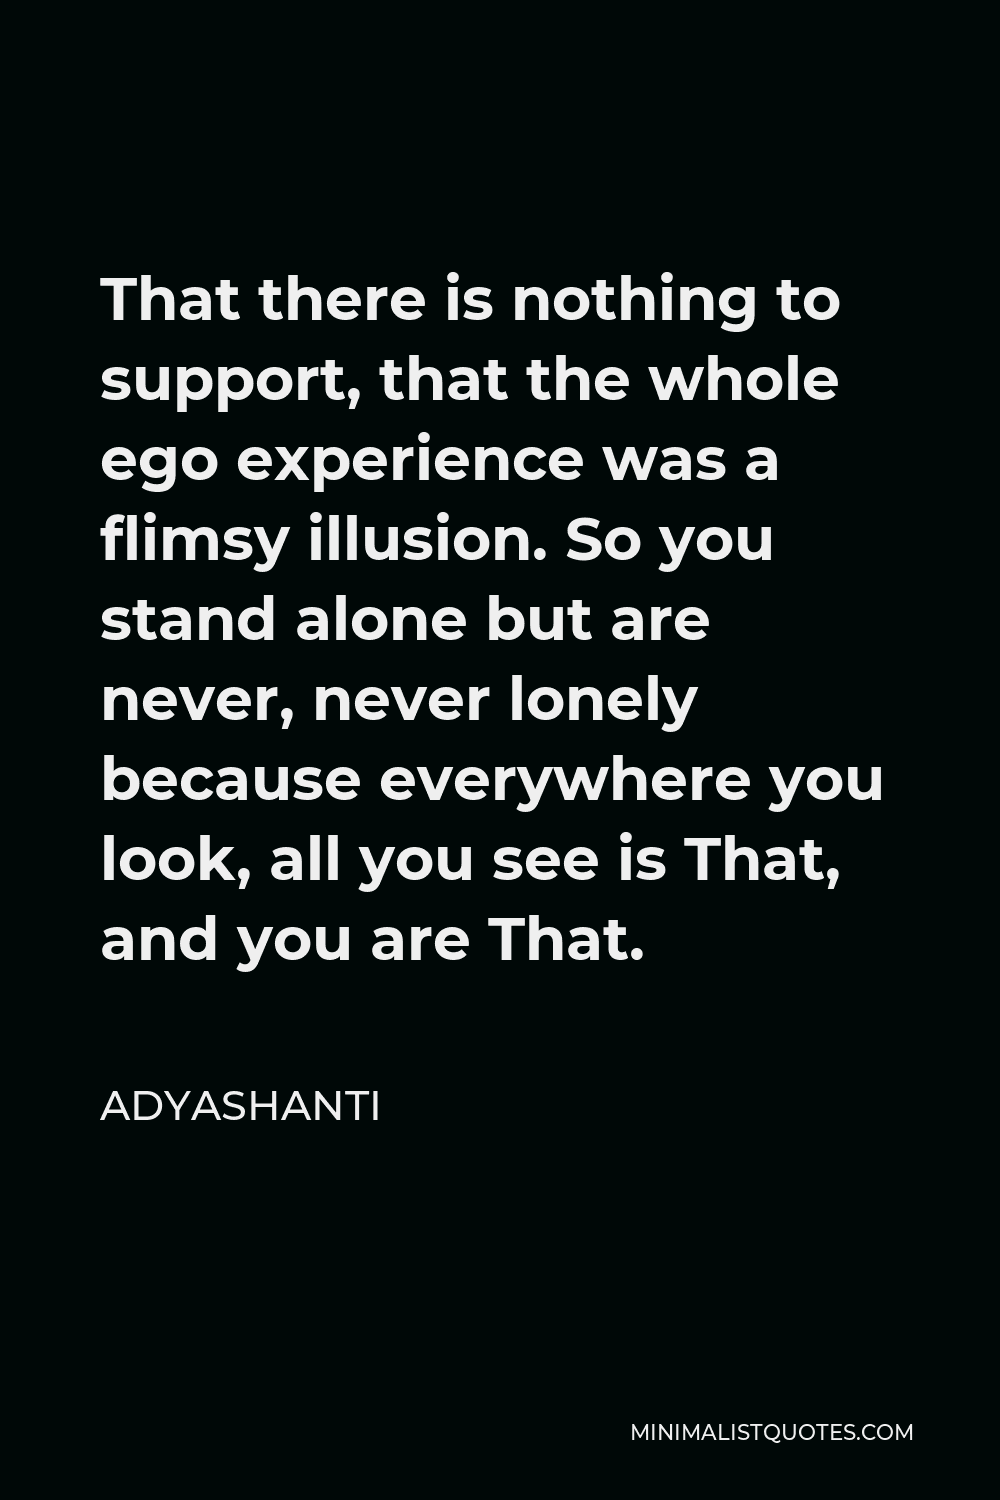 Adyashanti Quote - That there is nothing to support, that the whole ego experience was a flimsy illusion. So you stand alone but are never, never lonely because everywhere you look, all you see is That, and you are That.